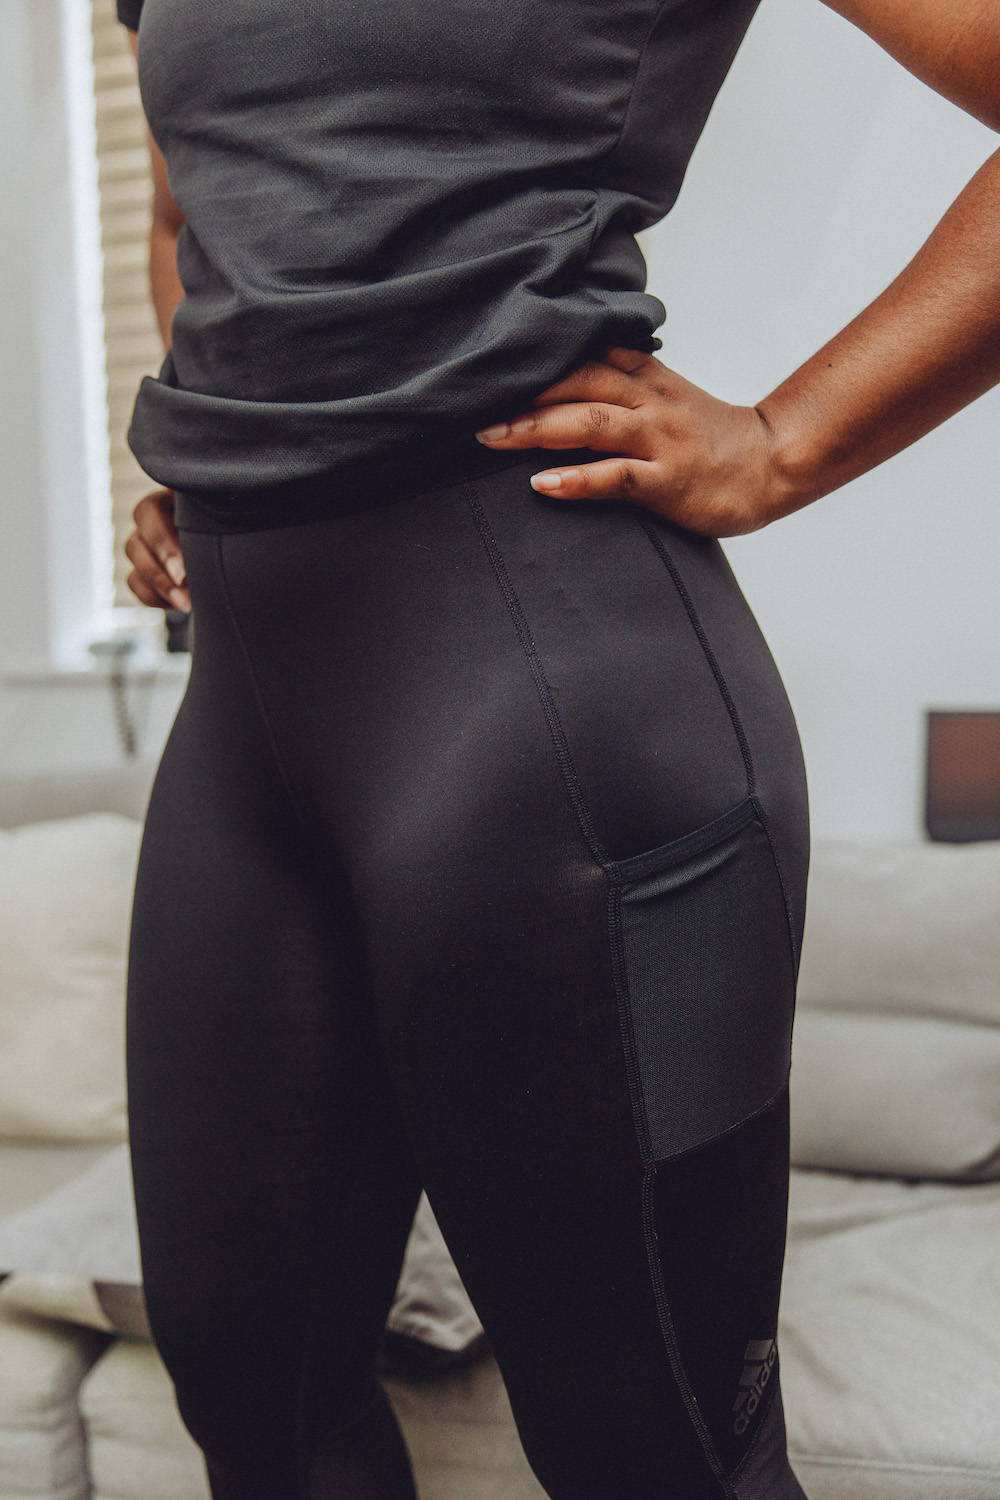 The Best Period-Proof Leggings for a Worry-Free Workout — Period Absorbing  Activewear